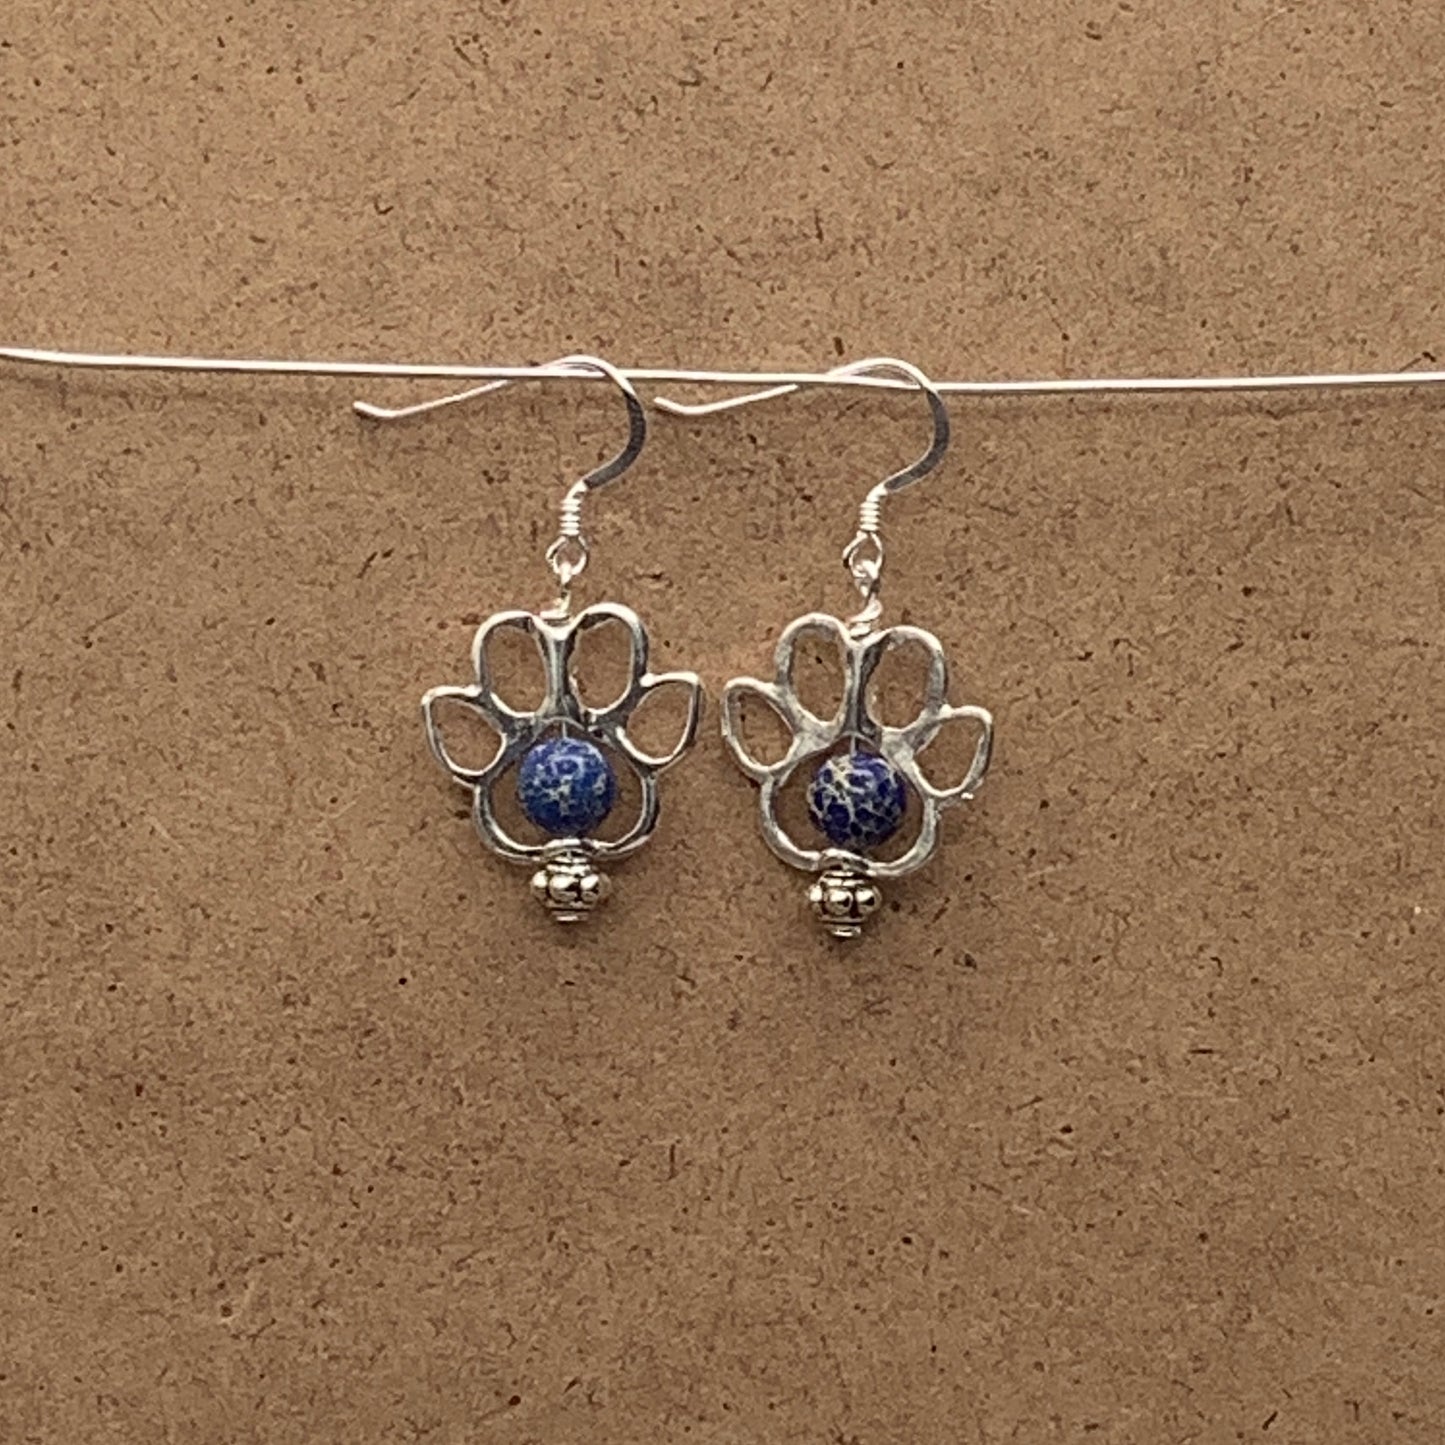 Dog Paw Earrings with Dyed Magnesite and Sterling Silver Earwire